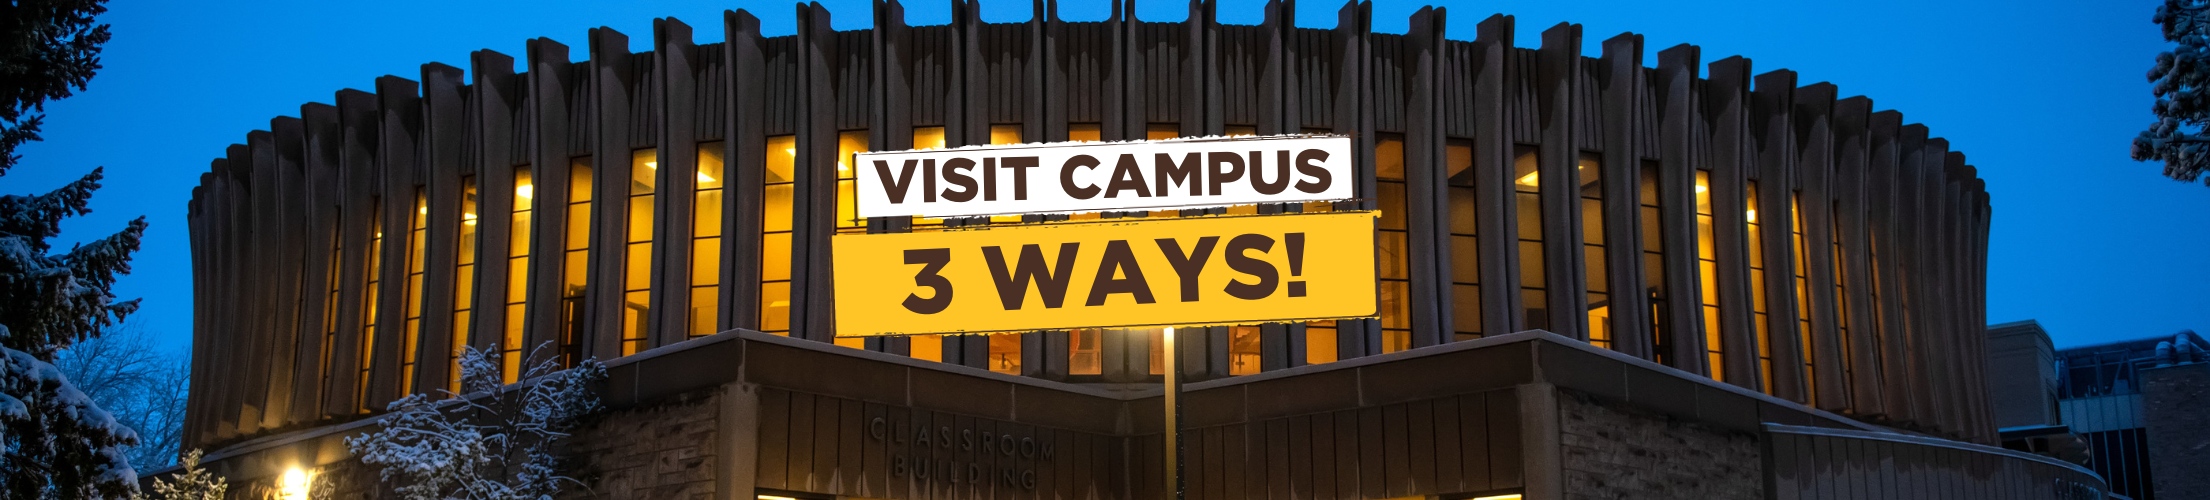 A winter scene of the UW classroom building lit up an night against the sky with the words "Visit Campus 3 Ways" over top in white and yellow boxes.